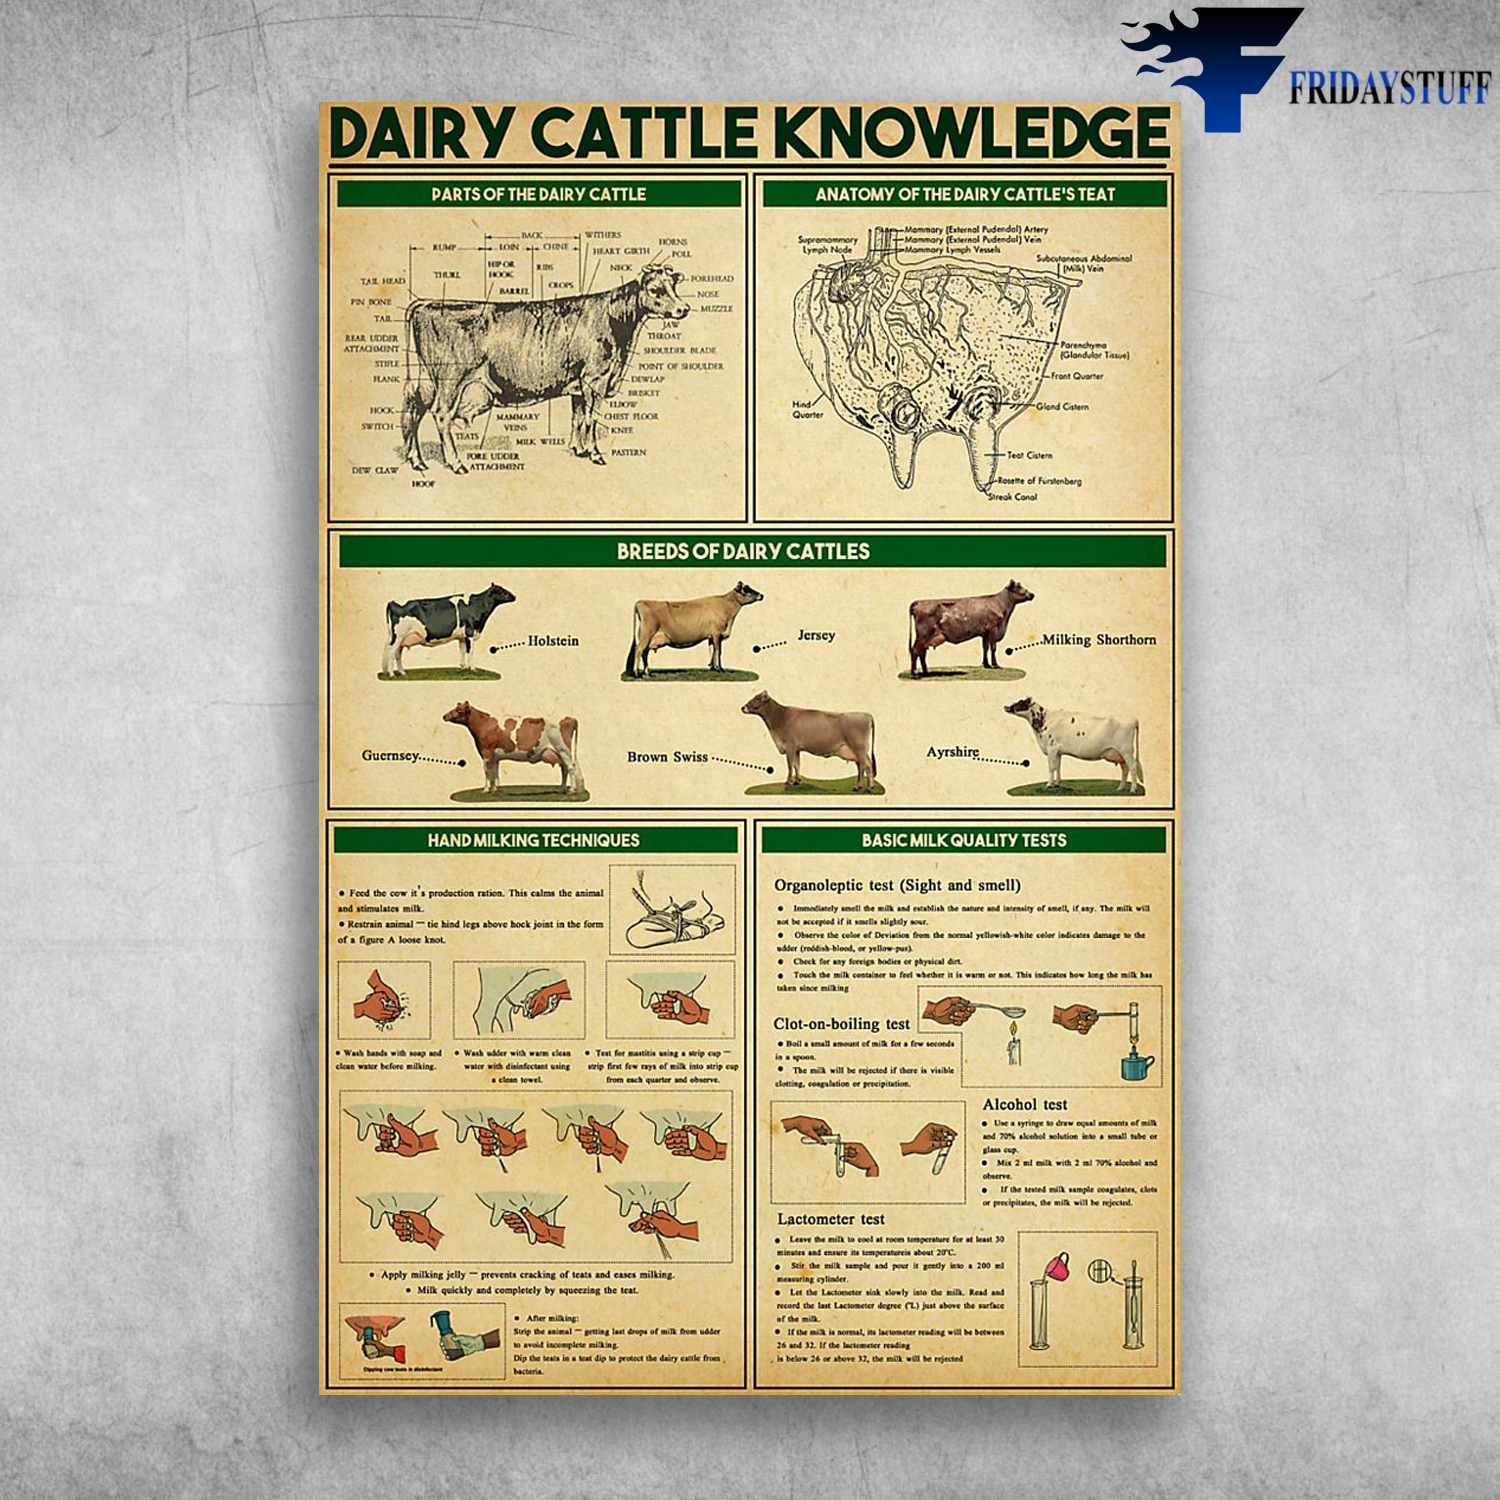 Dairy Cattle Knowledge Parts Of The Dairy Cattle Breed Of Dairy Cattles